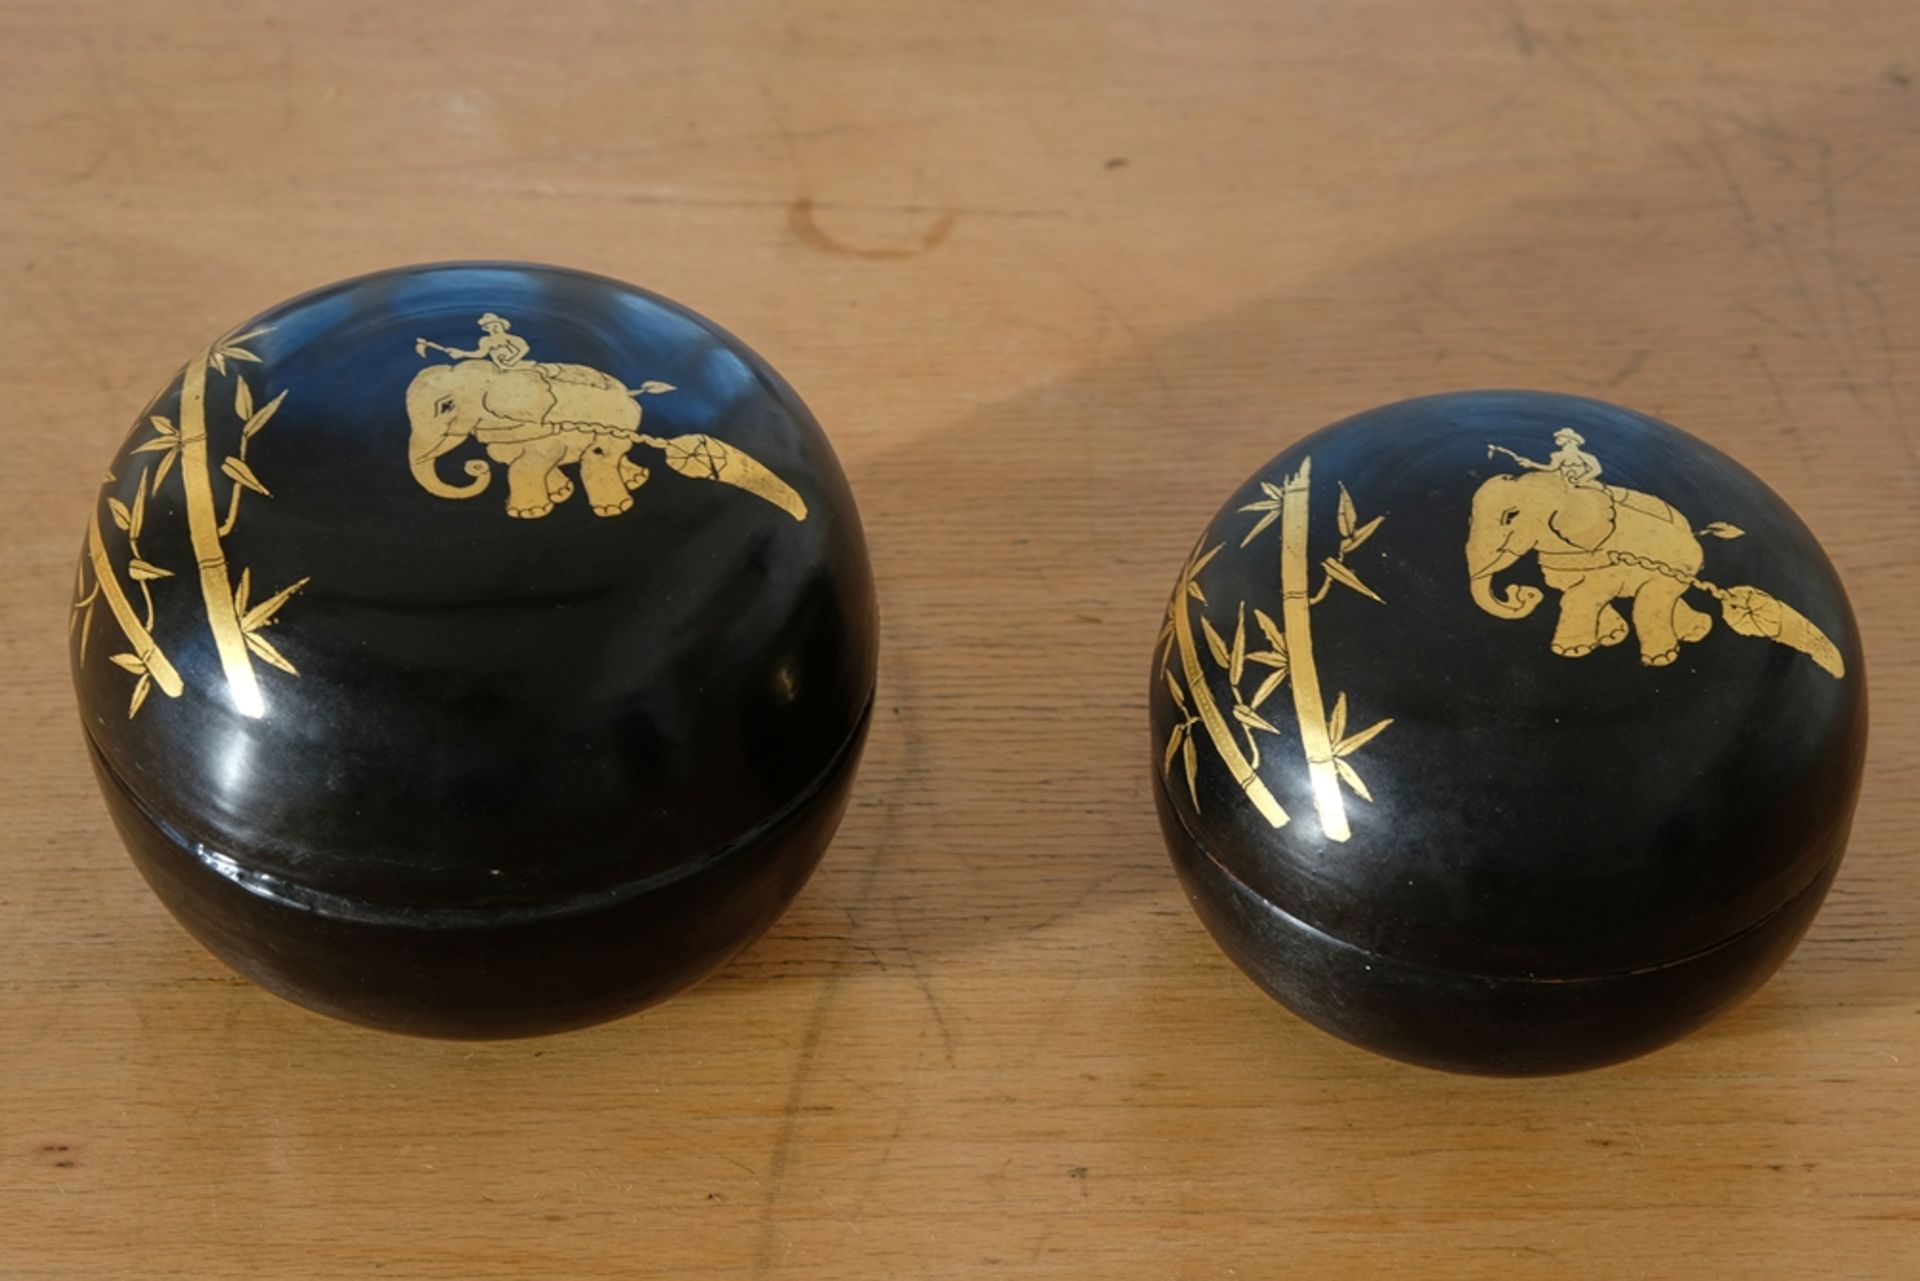 Two lacquer boxes, Burma, 1980s. Black lacquer with gold decoration. Depiction of working elephants